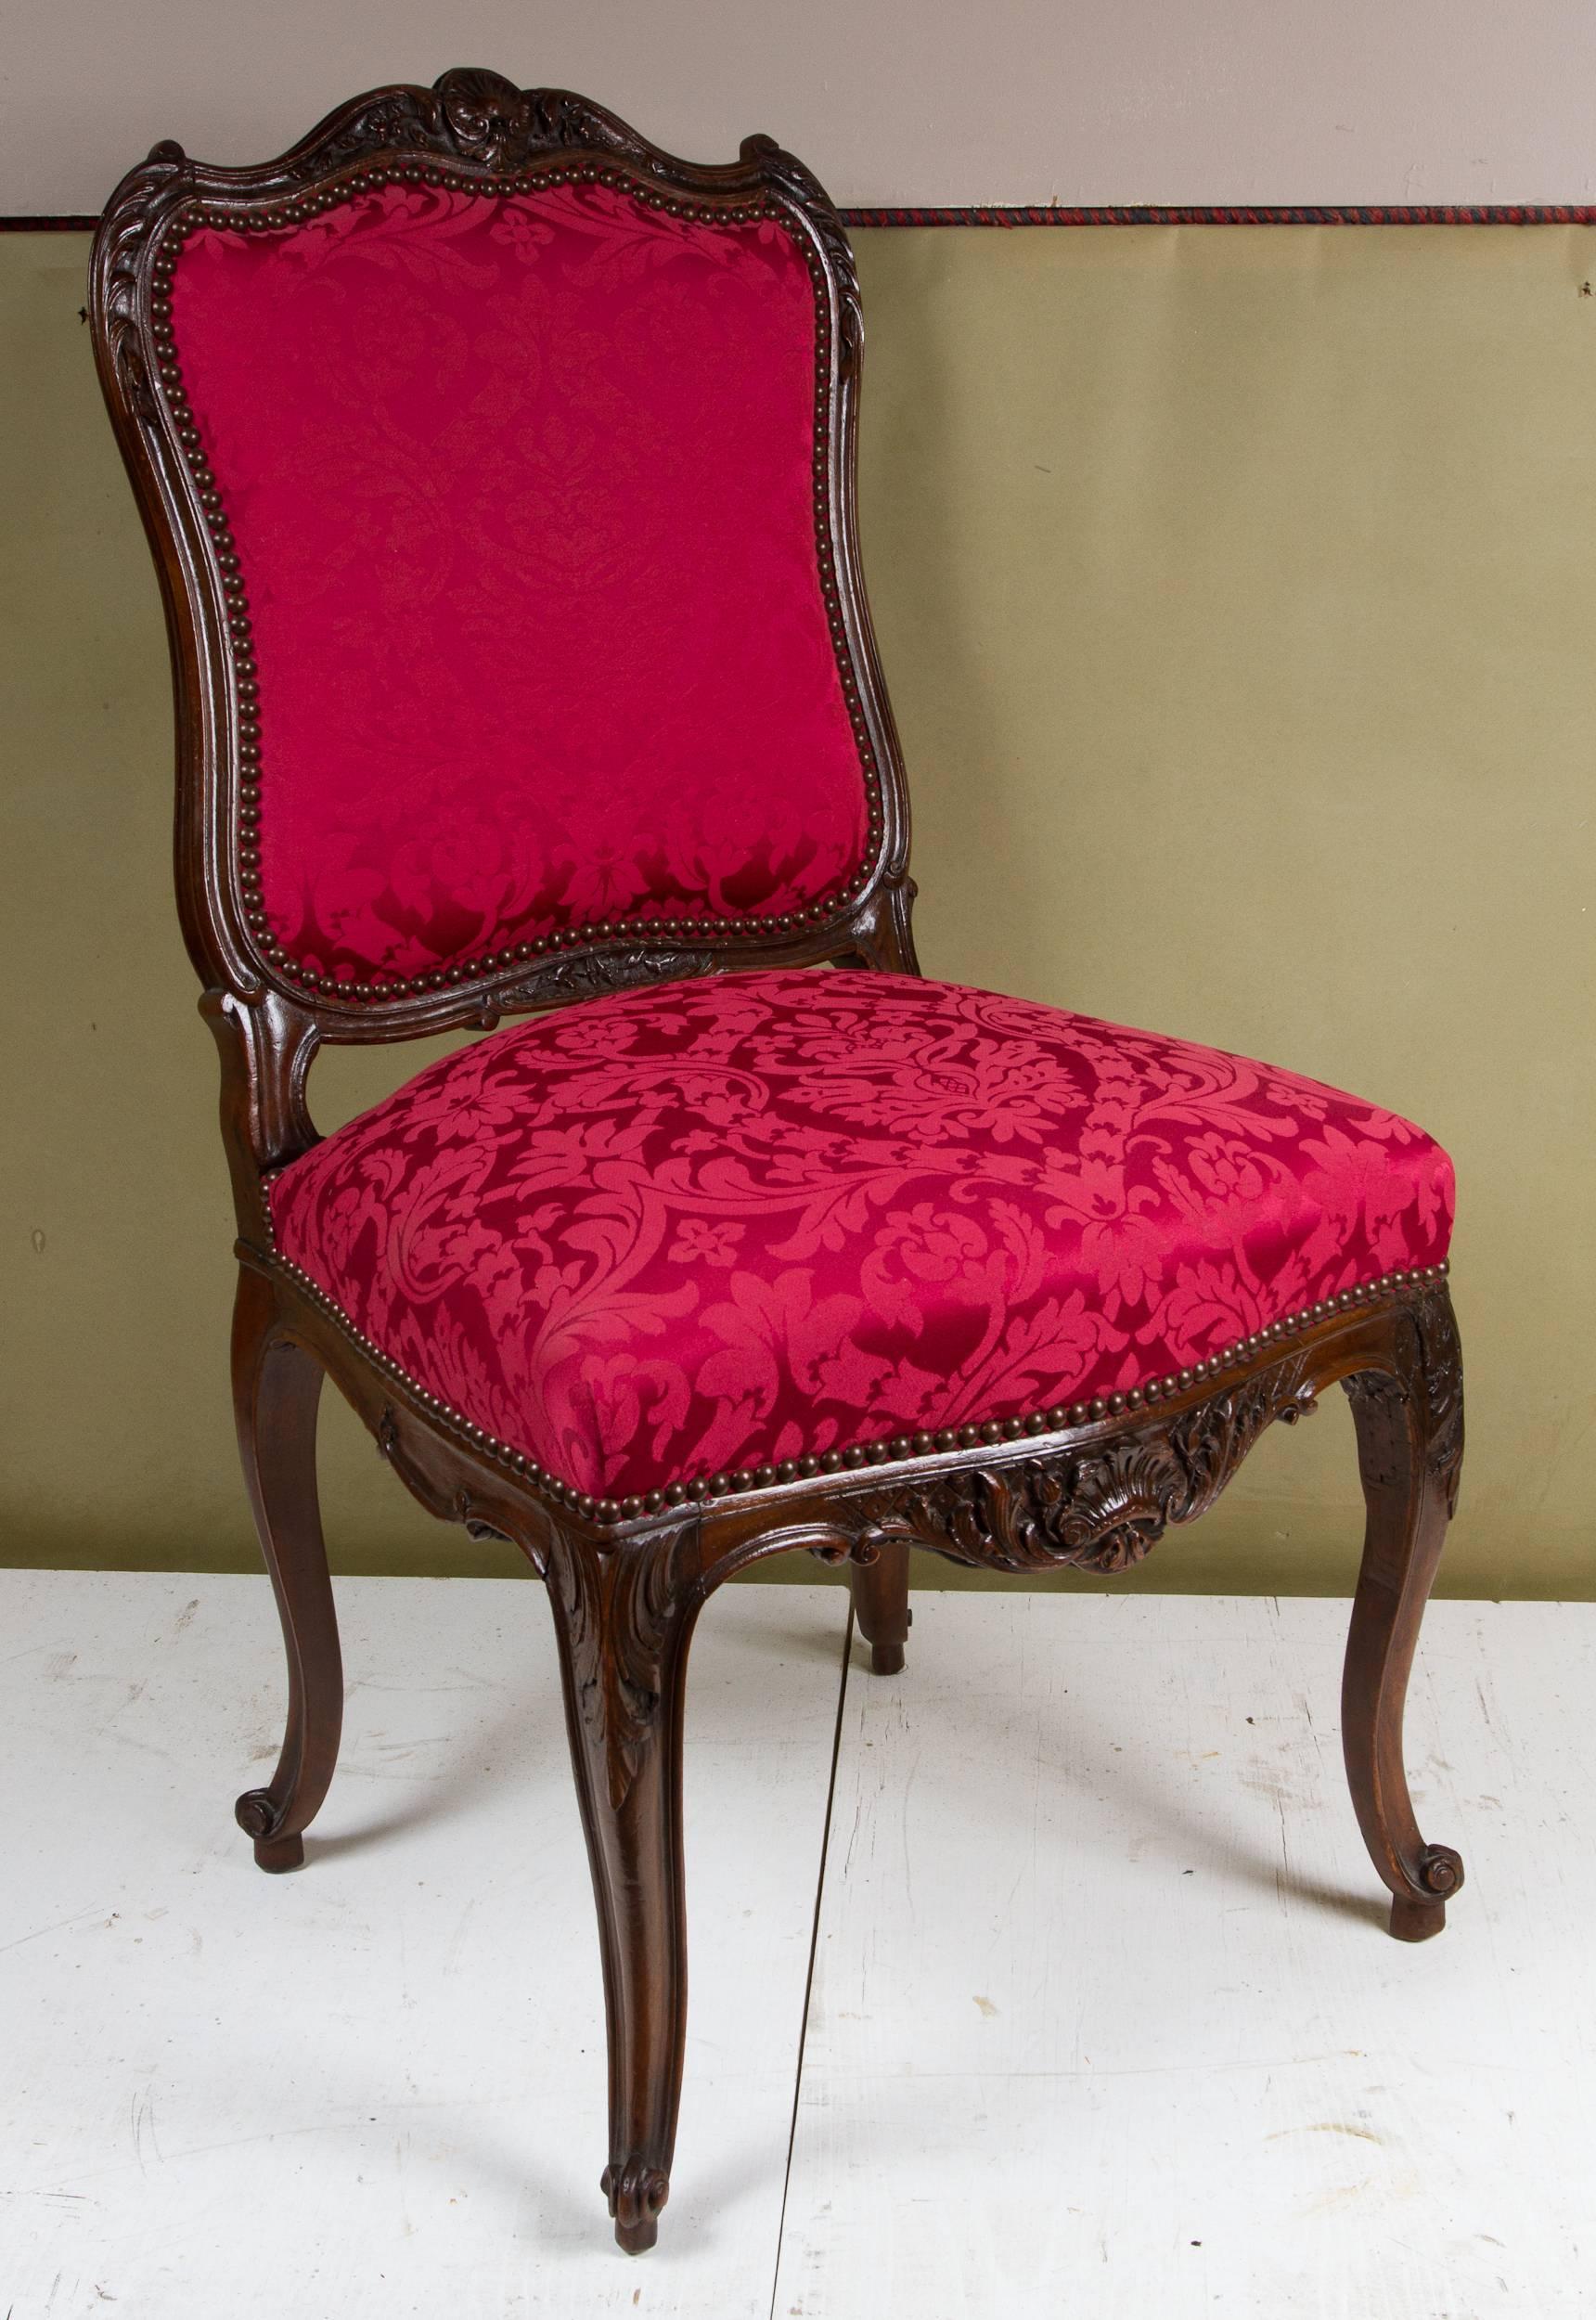 Set of four Louis XV style wooden carved chairs with crimson red brocart fabric.